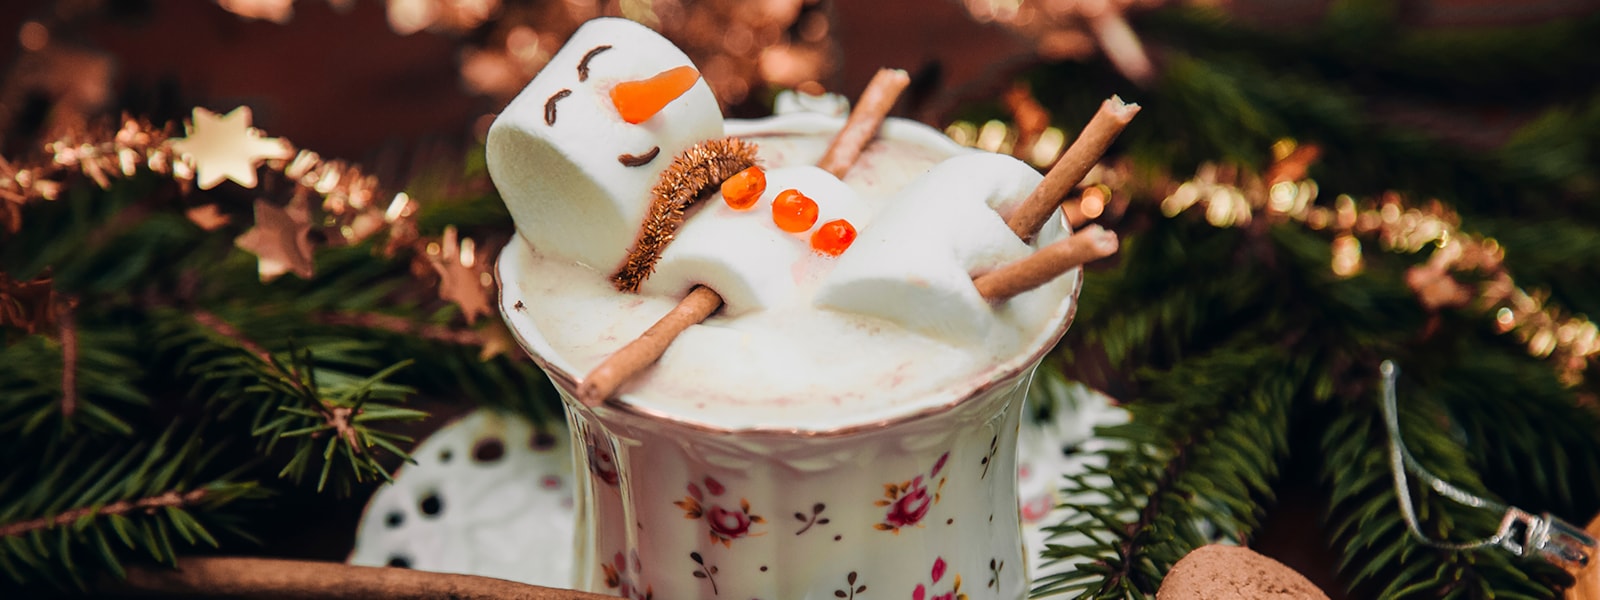 Marshmallow snowman in cup 